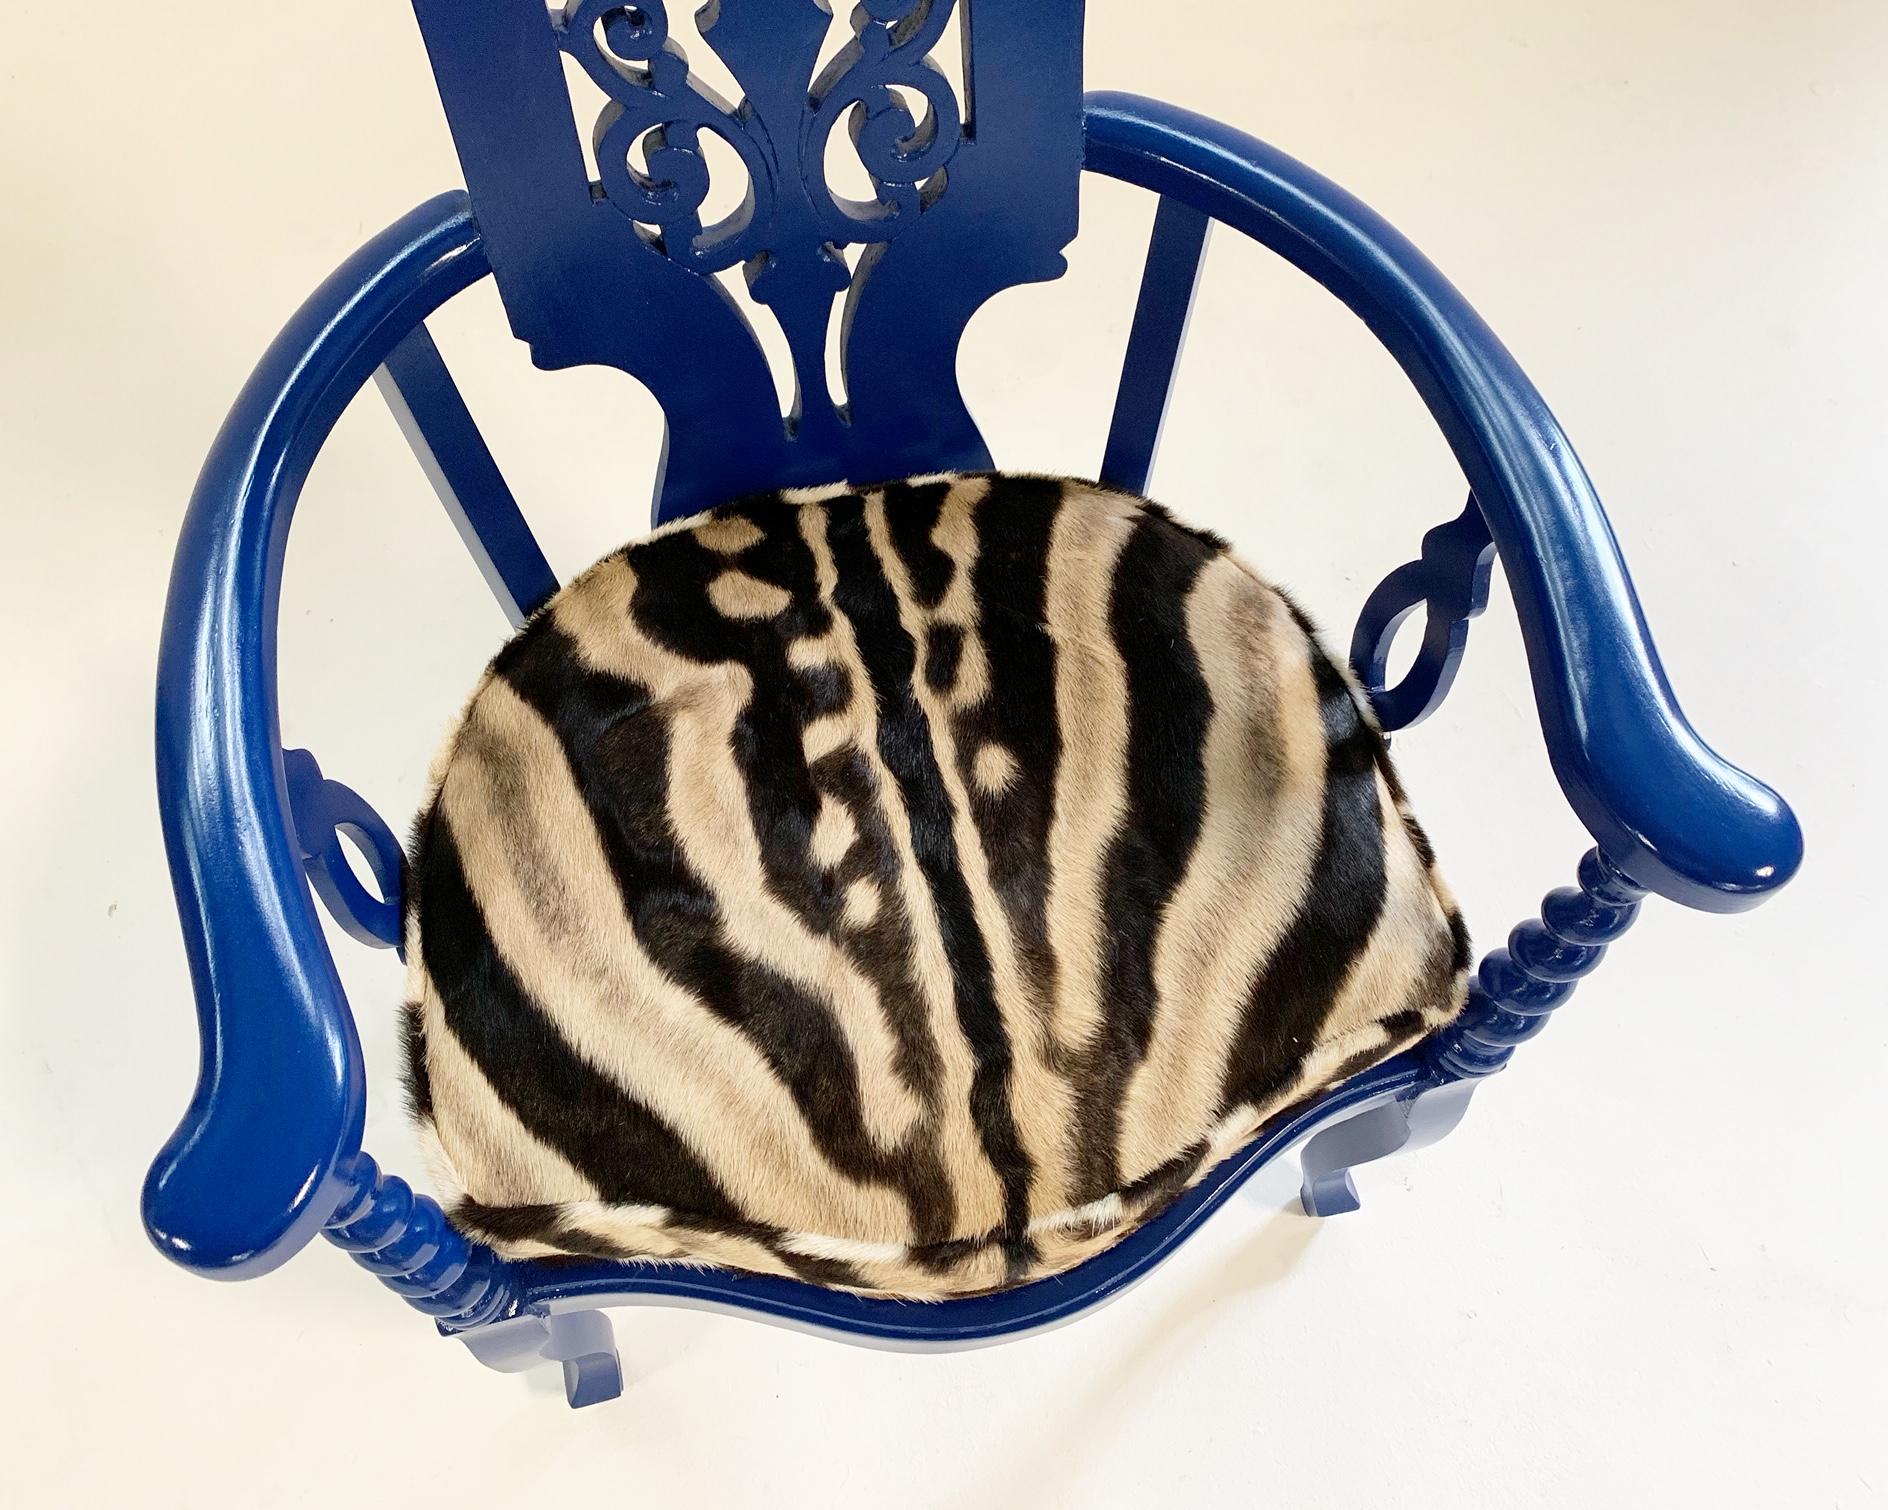 We love this elegant Renaissance revival armchair. The oak needed some TLC so we decided to make it loud and paint it a cool Yves Klein blue. The seat is caned and we added a custom zebra hide cushion for pop. Feather filled of course!